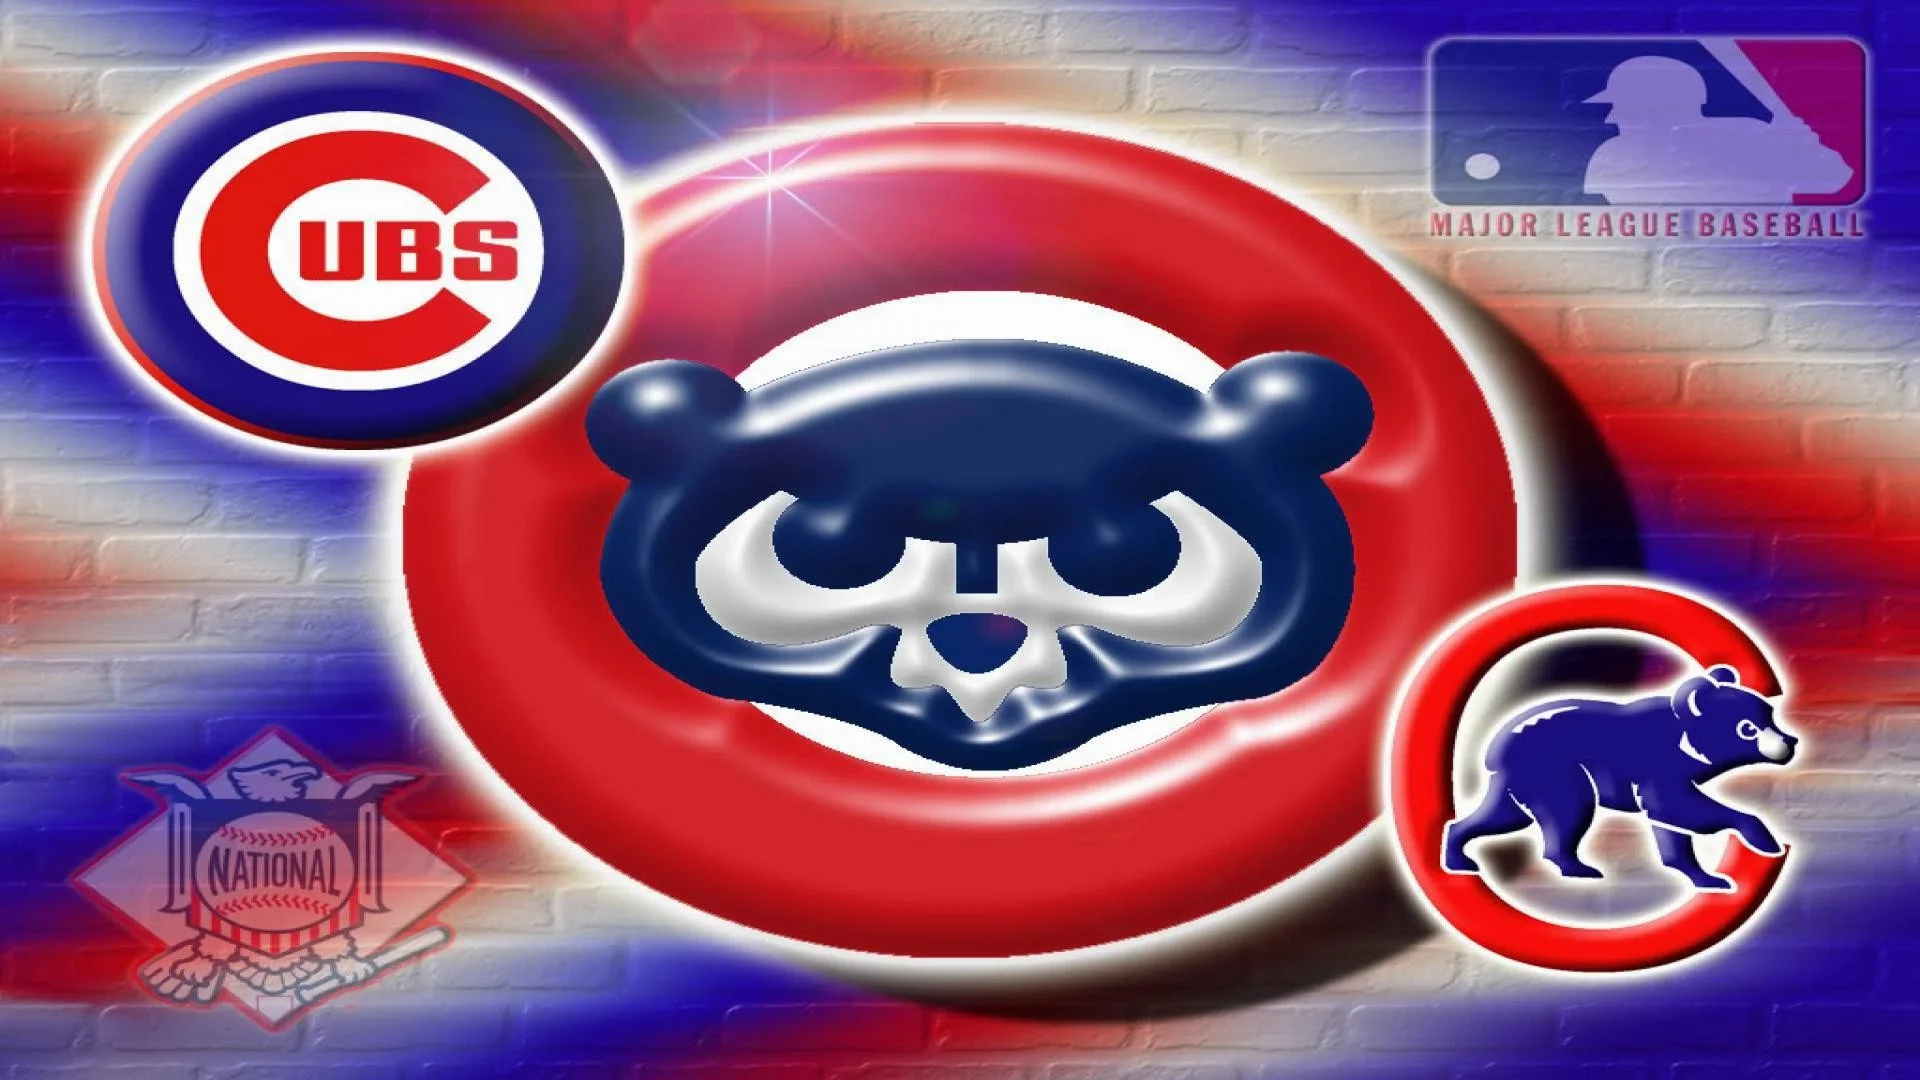 Chicago Cubs CHICAGO CUBS mlb baseball background wallpaper